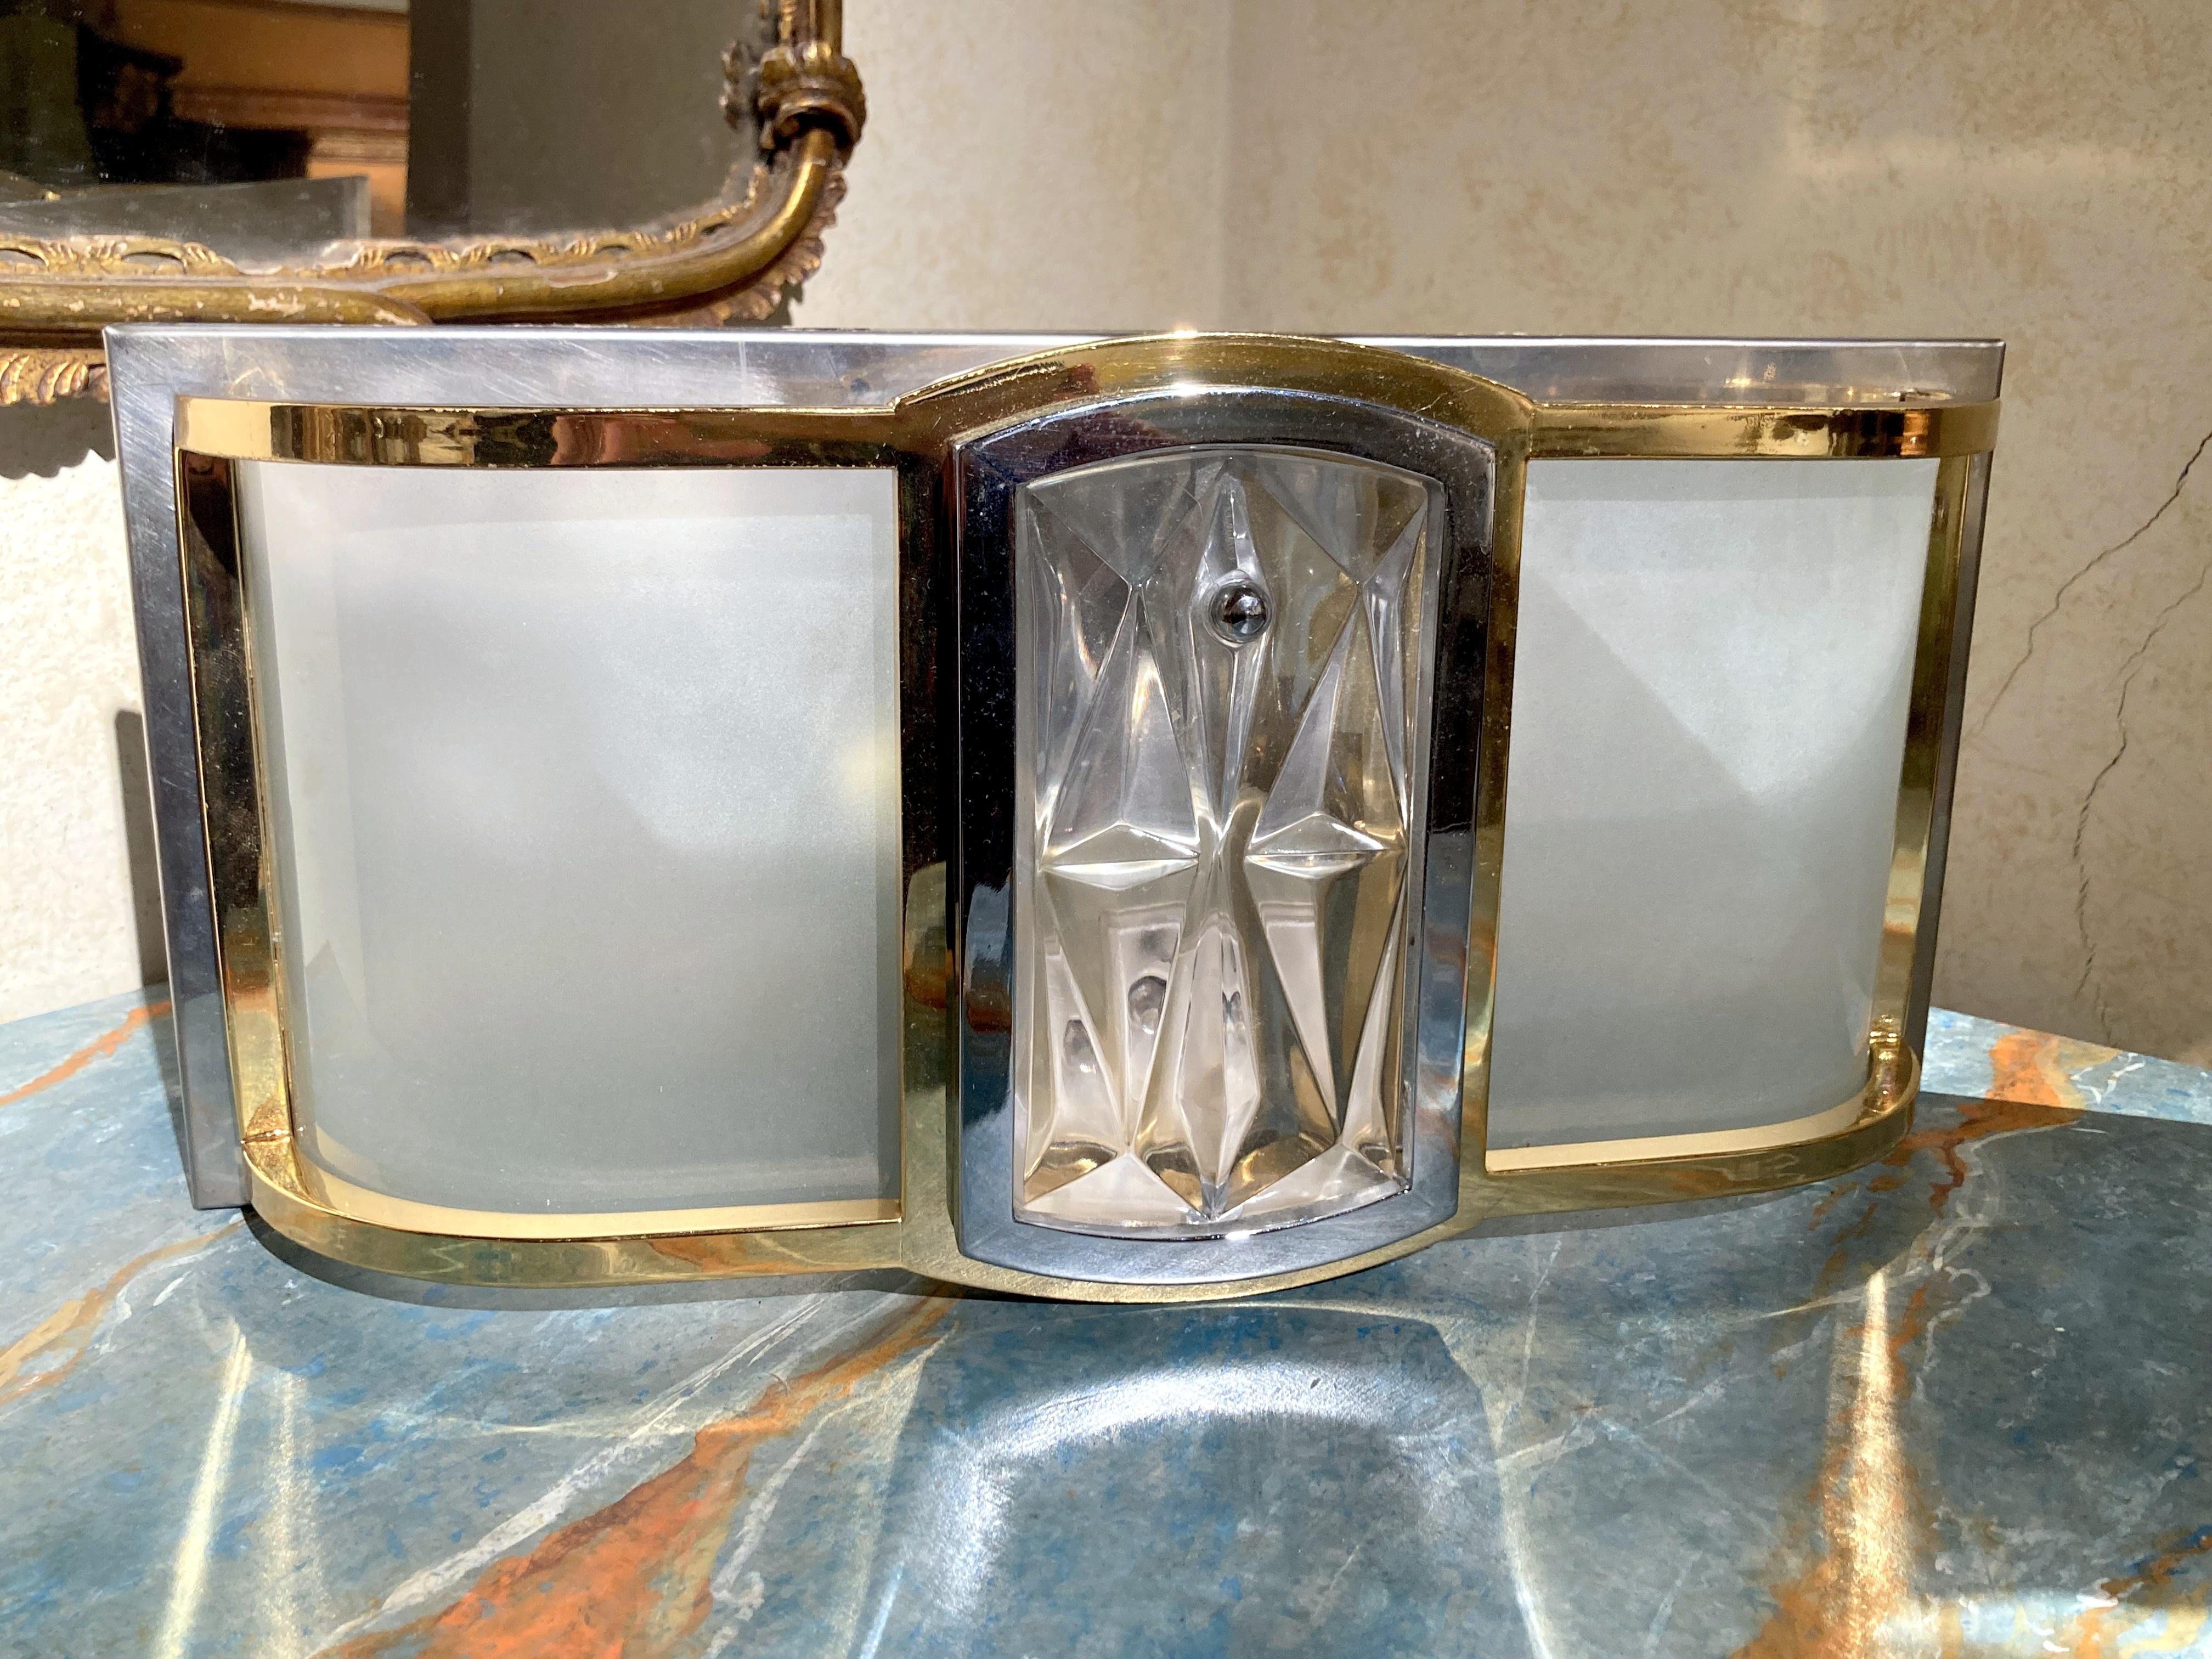 This stylish Italian Mid Century Modern pair of wall sconces or ceiling lights is an attractive light fixture set made of curved shaped frosted glass panels inserted in a polished brass frame mounted on a chrome panel, each sconce houses two light